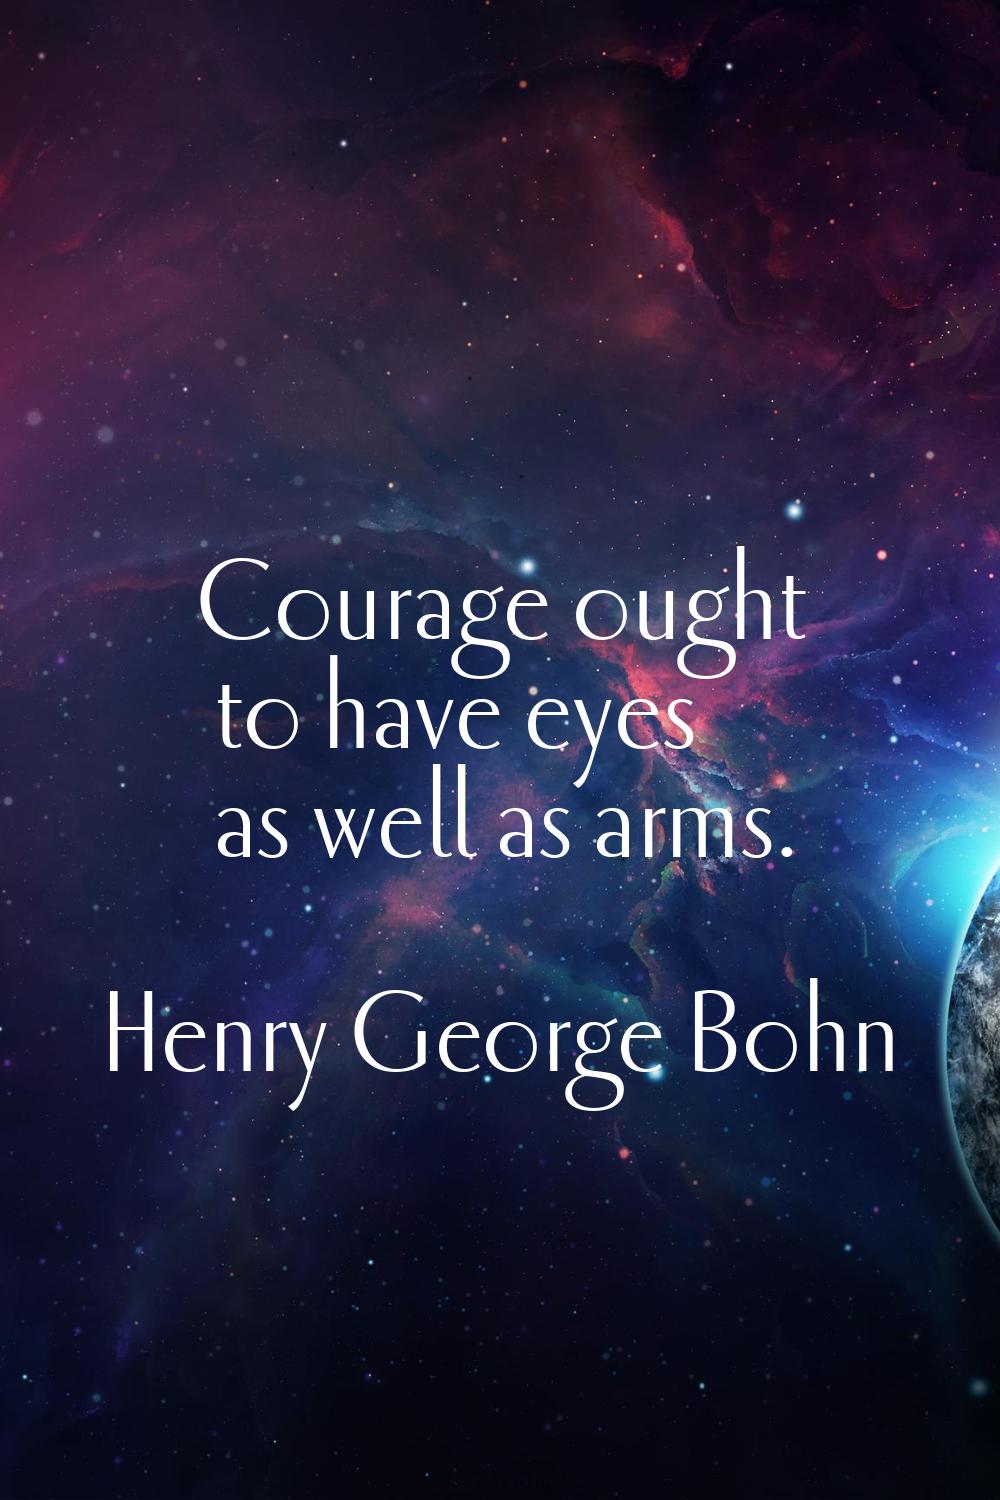 Courage ought to have eyes as well as arms.